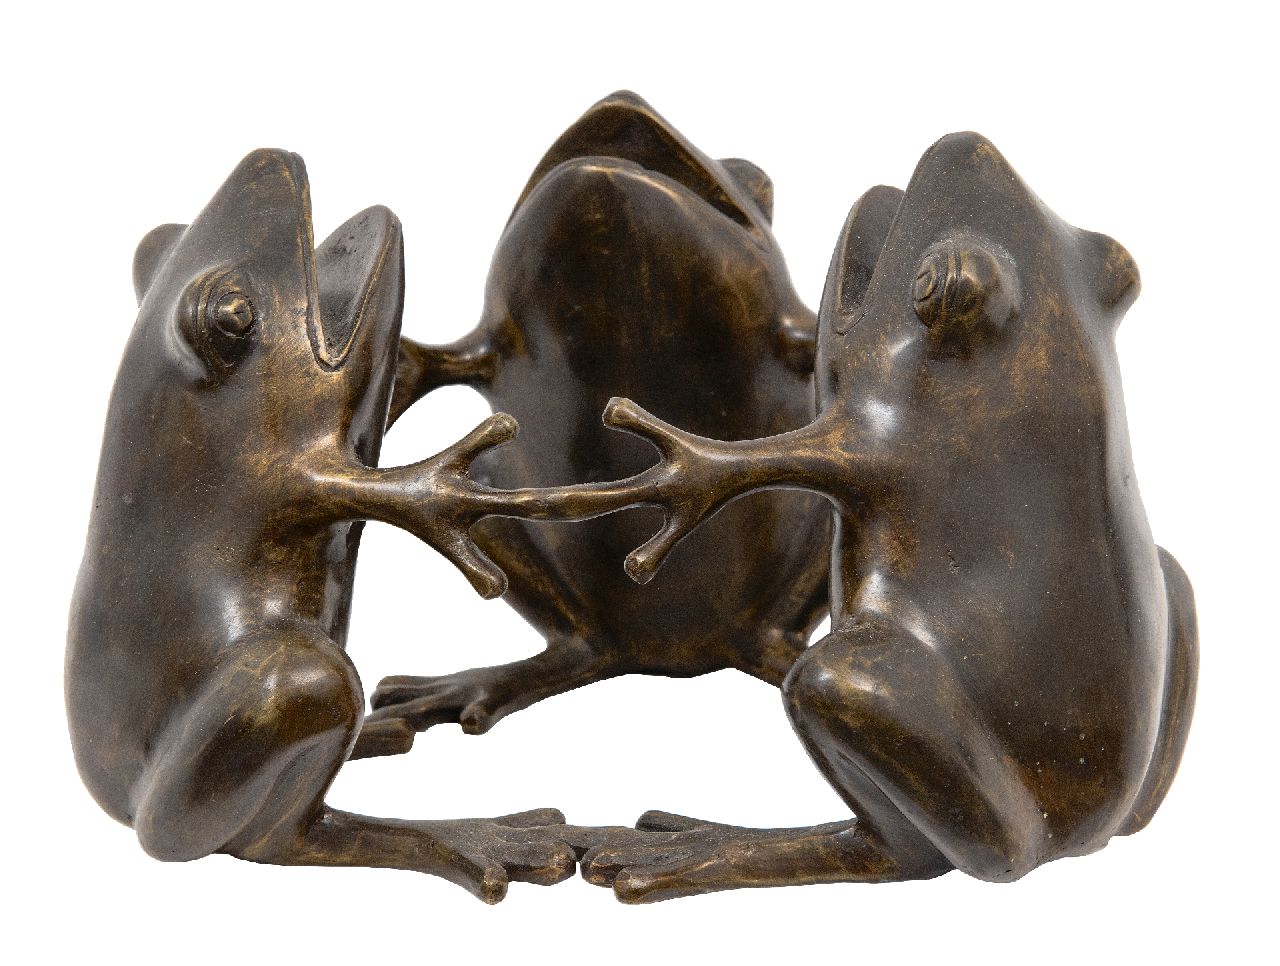 Onbekend 20e eeuw (1e helft)  | Onbekend | Sculptures and objects offered for sale | Three frogs, bronze 19.5 cm